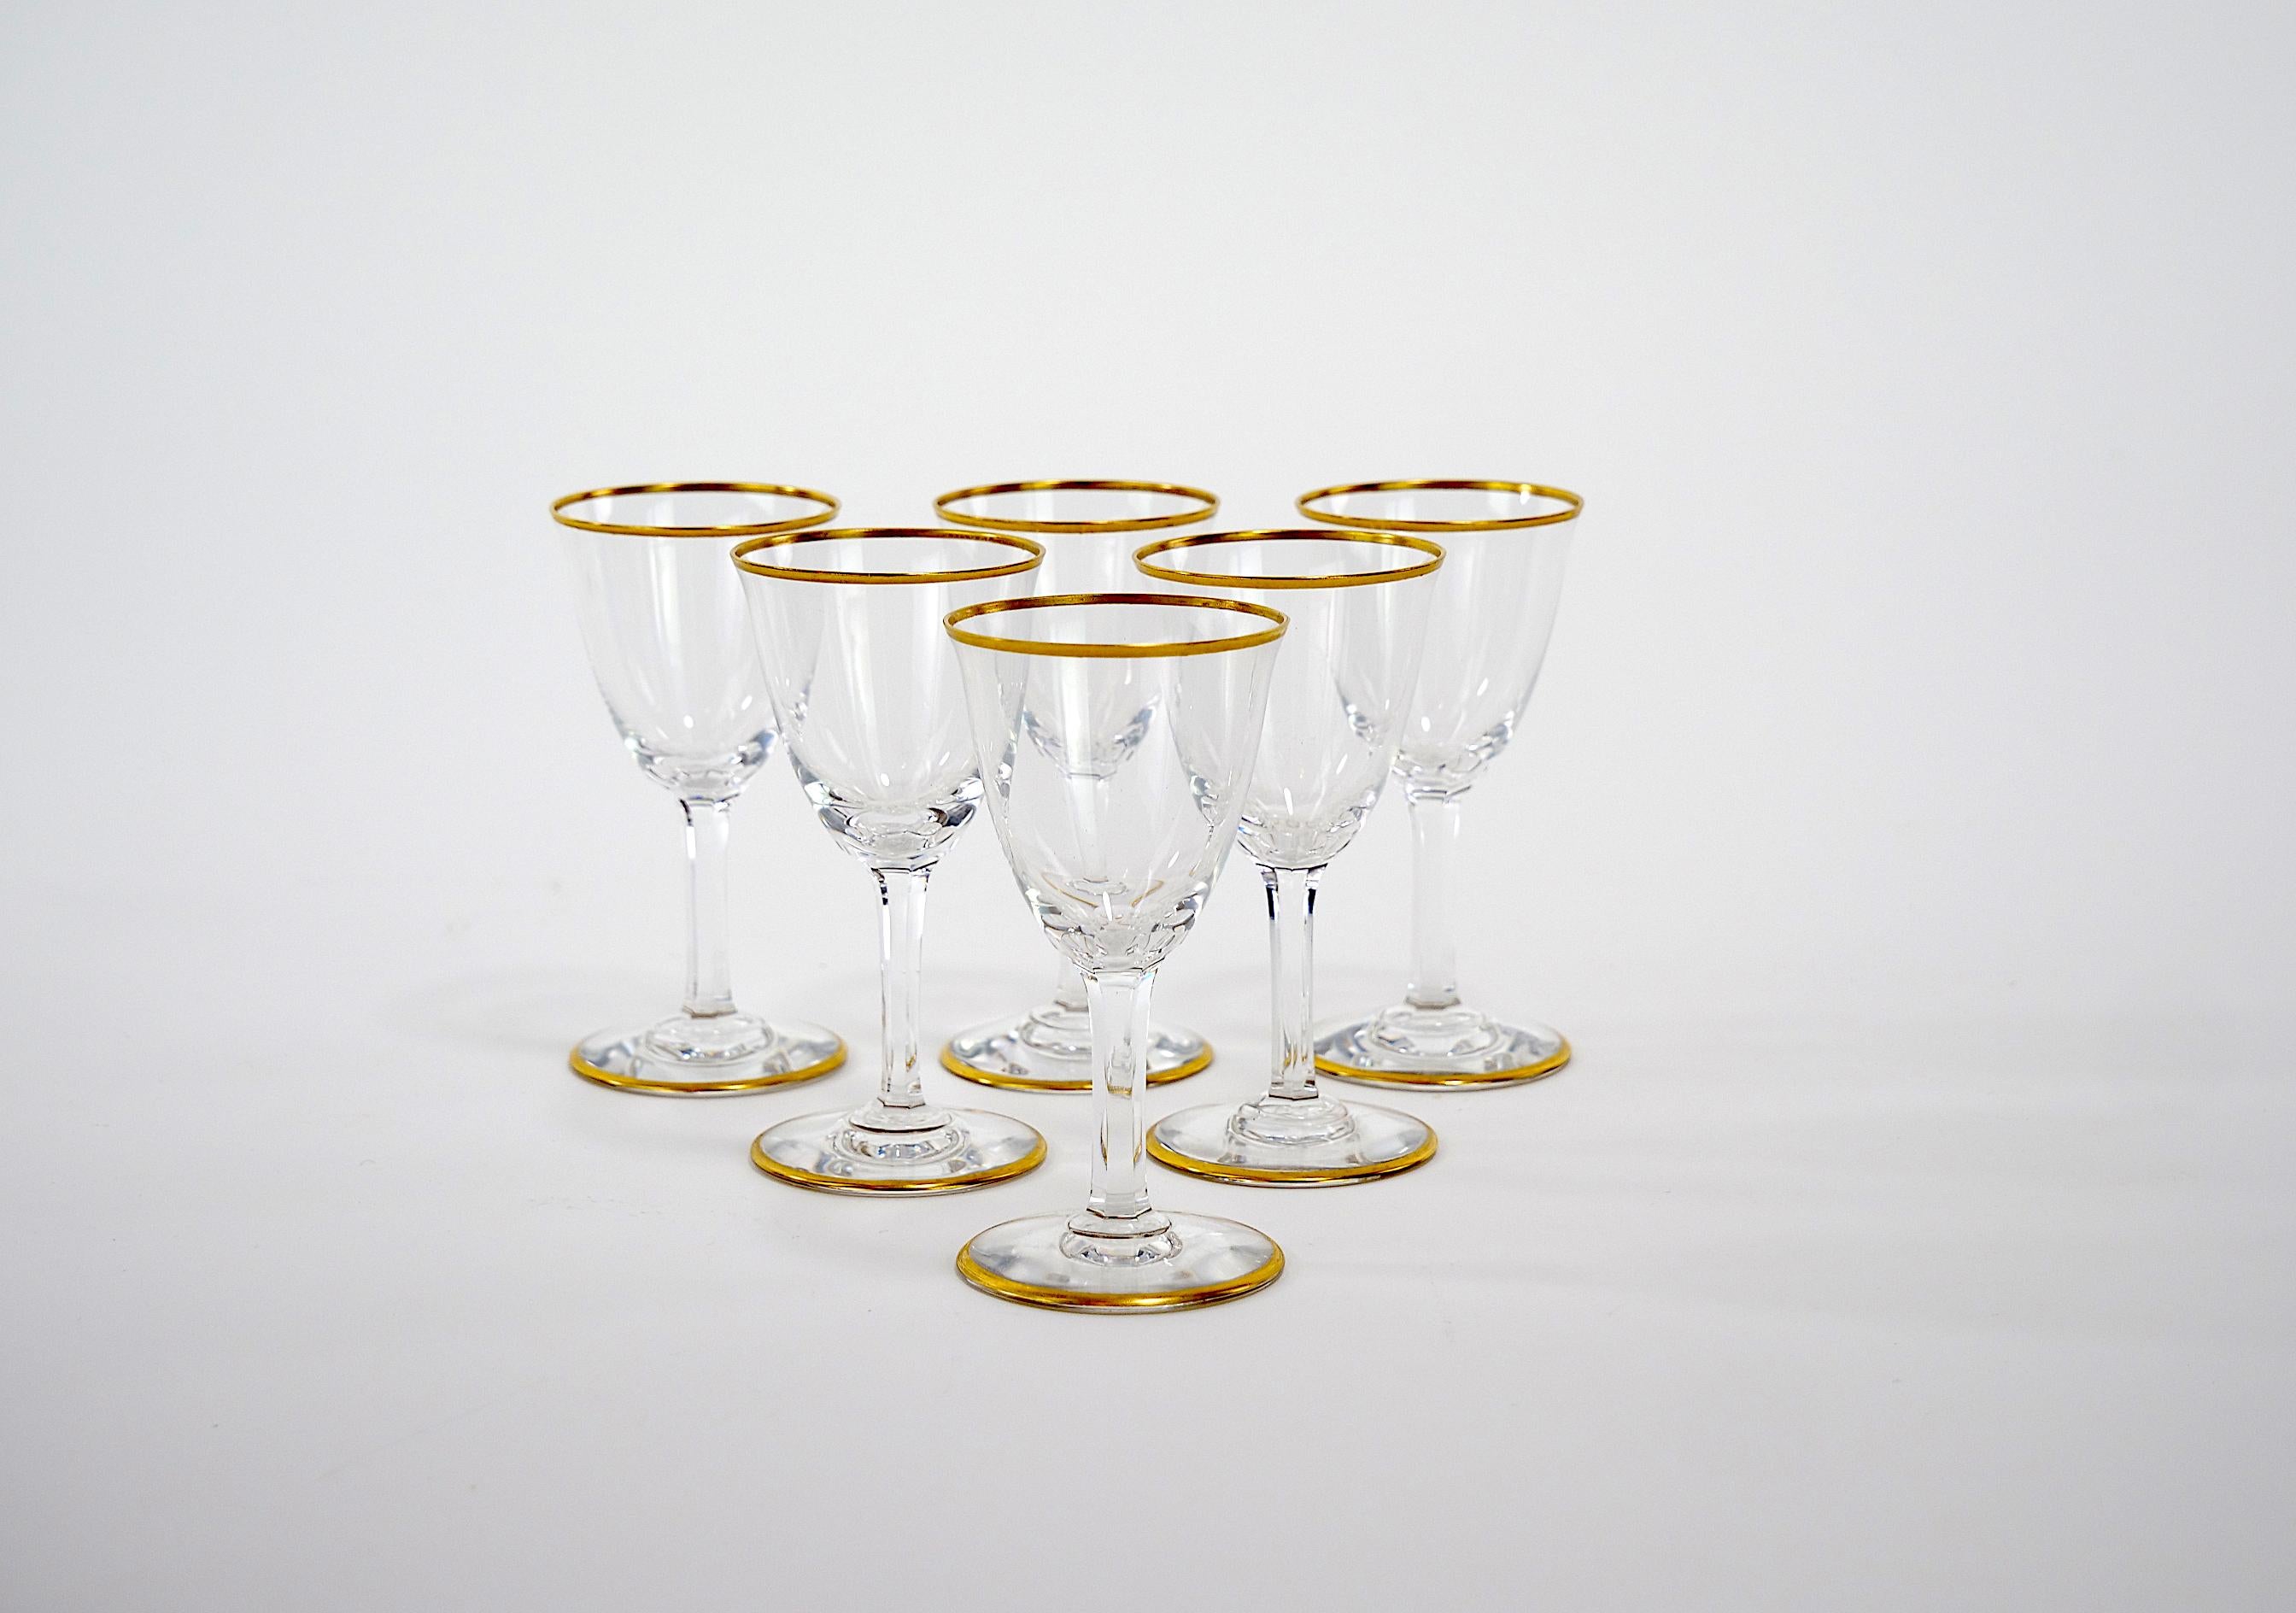 Gilt Baccarat Crystal Liquor / Sherry Glassware Service / 12 People For Sale